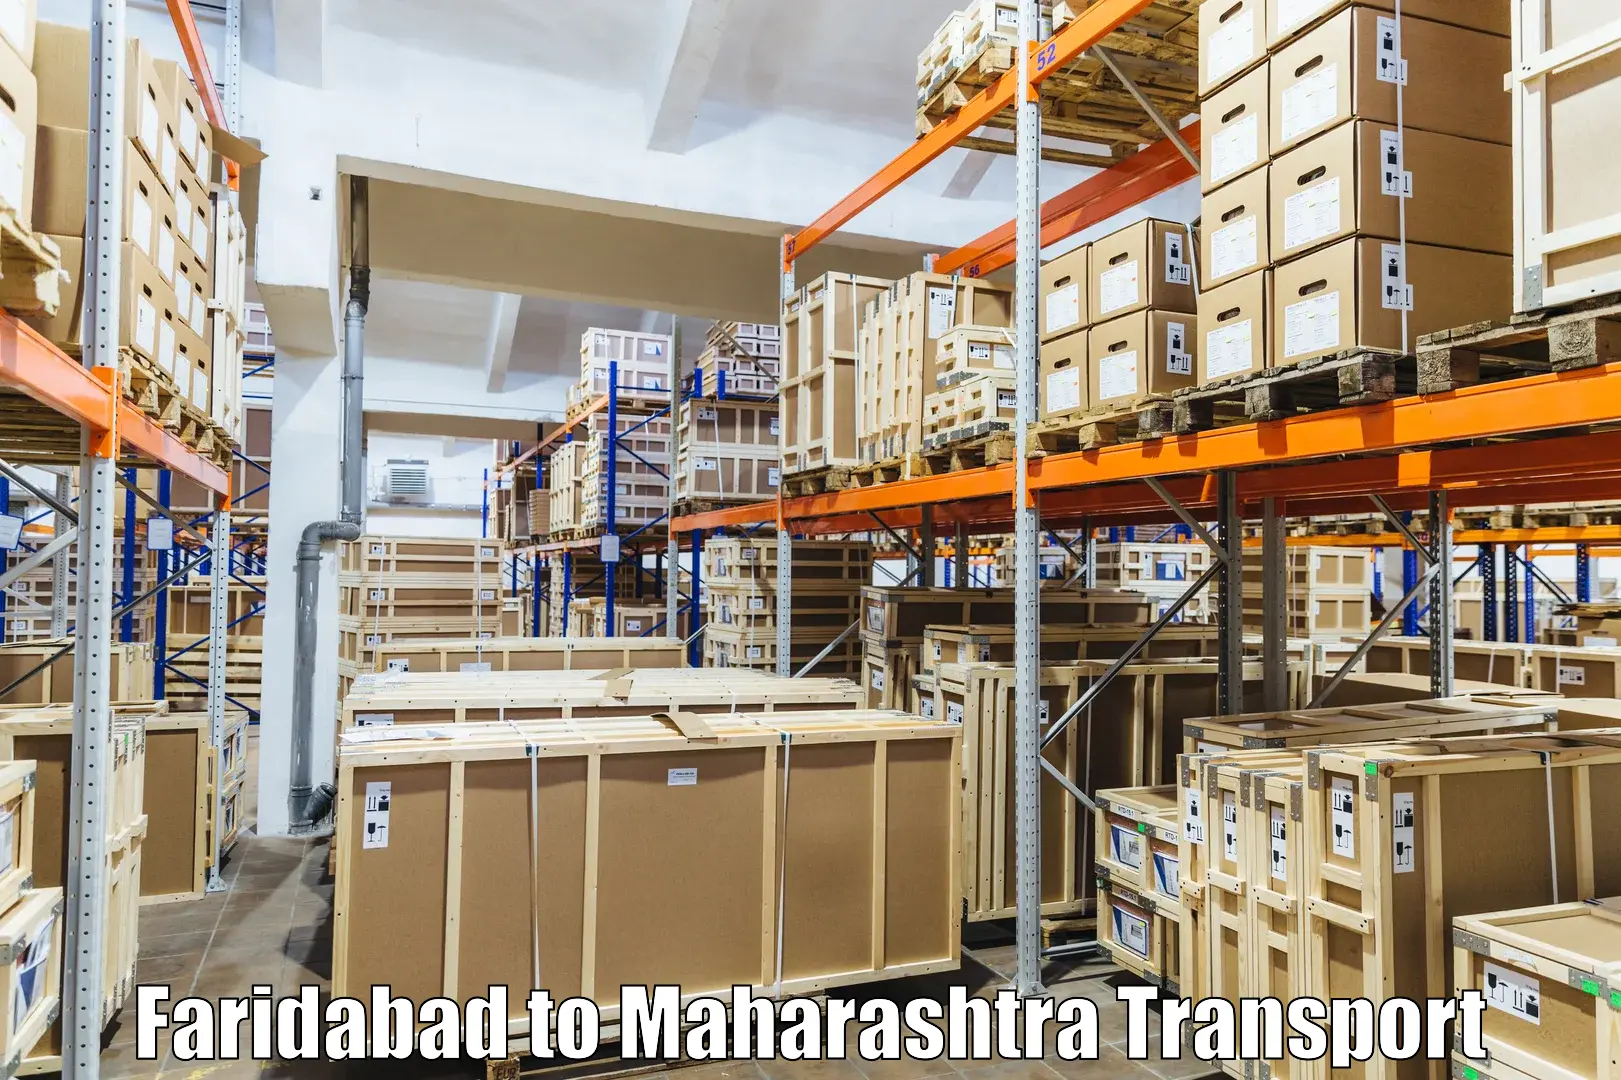 Transport shared services in Faridabad to Lonikand